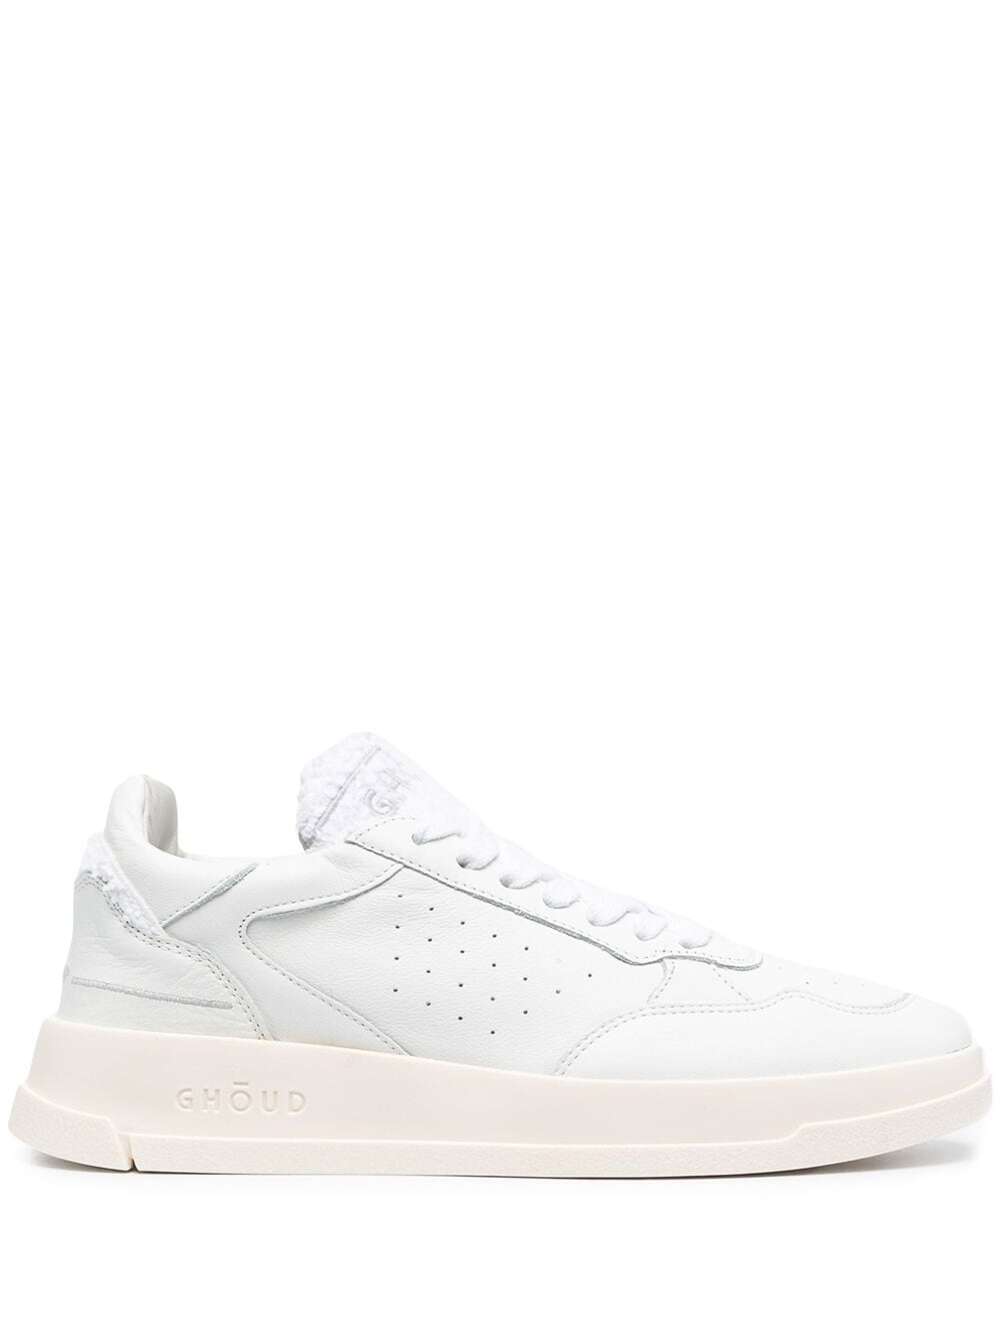 GHOUD White Leather Sneakers With Logo